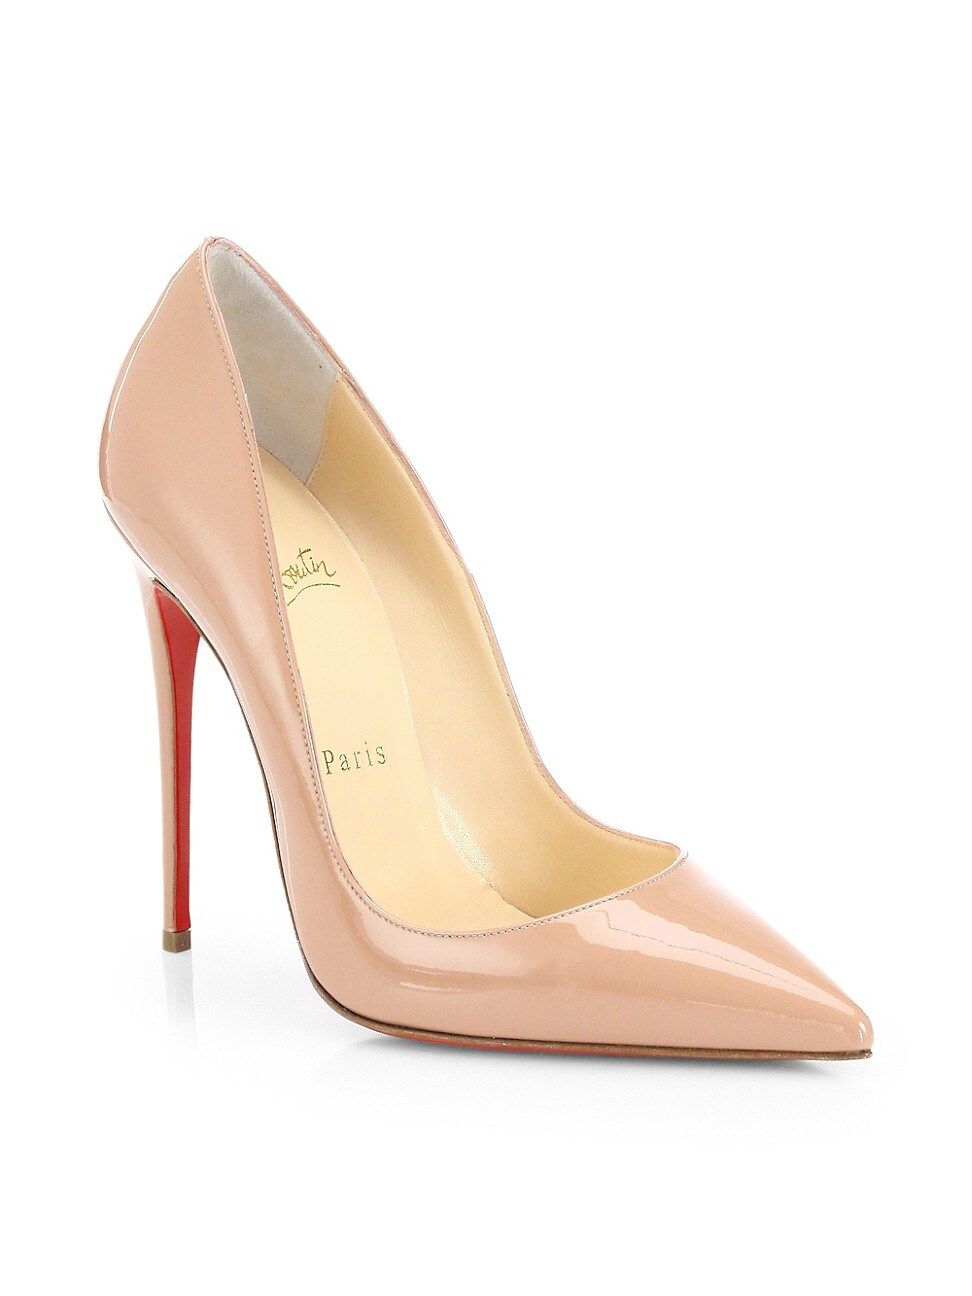 Christian Louboutin Women's So Kate 120 Patent Leather Pumps - Nude - Size 7 | Saks Fifth Avenue